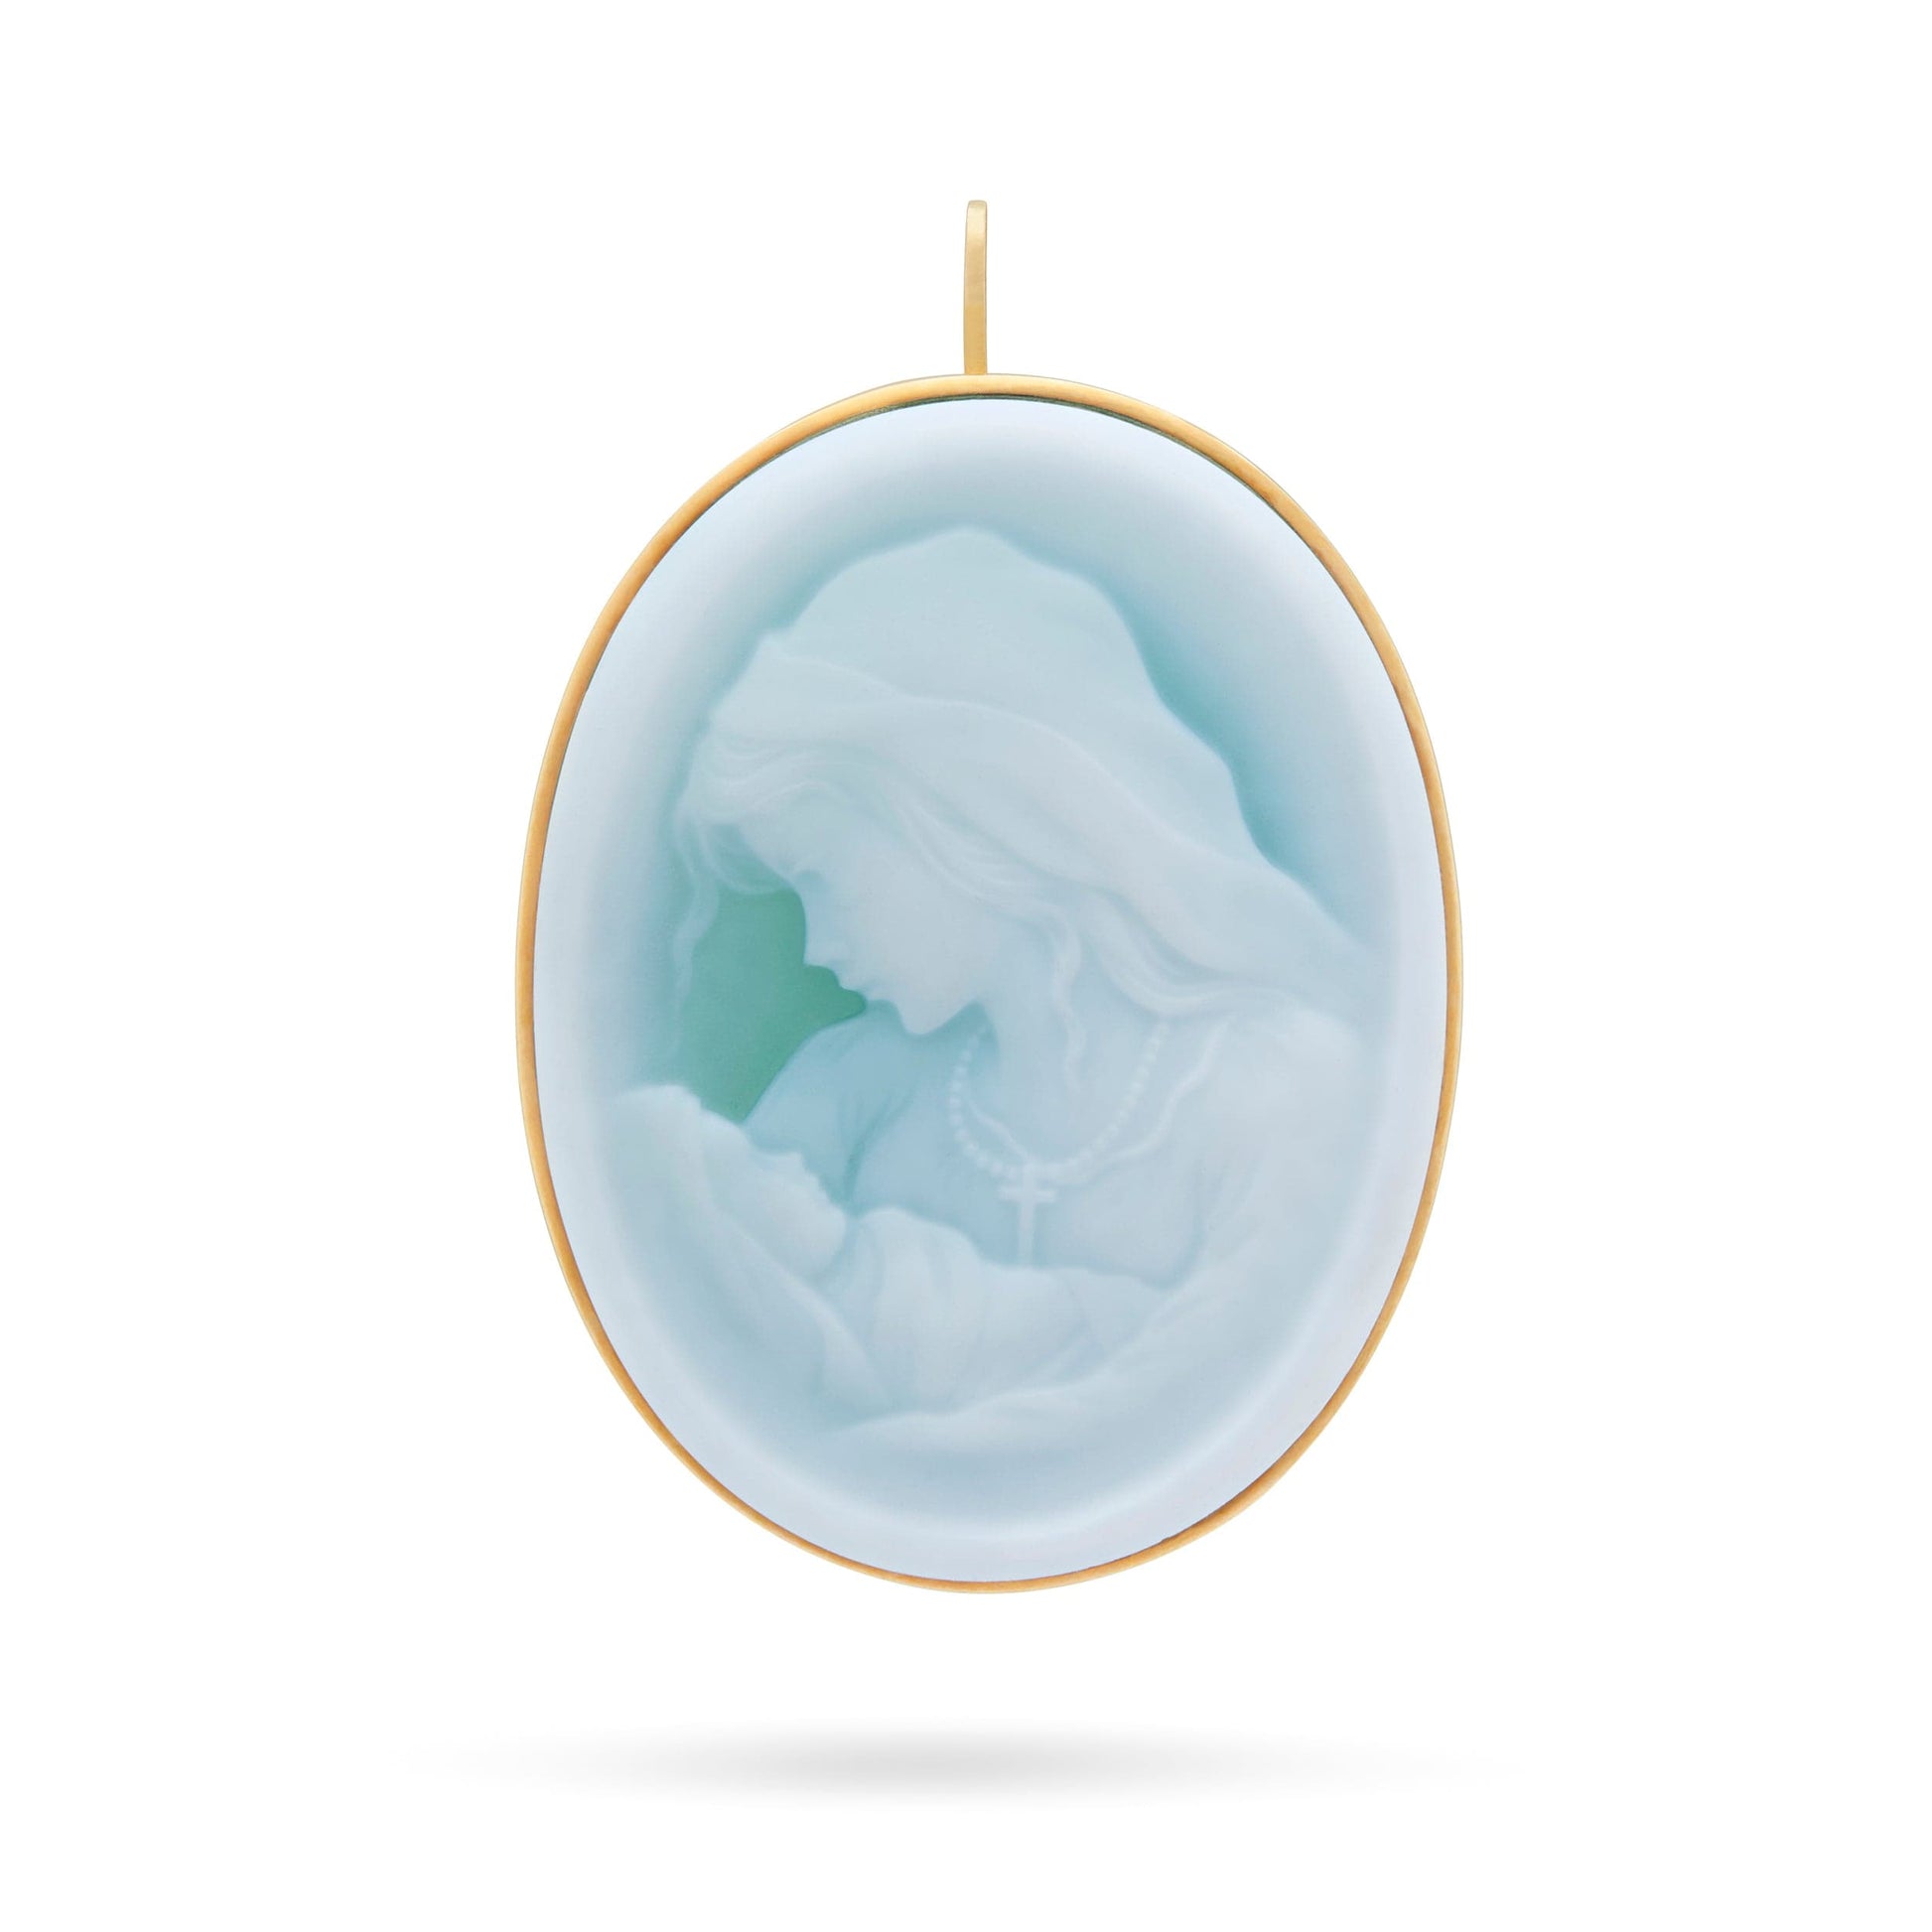 MONDO CATTOLICO 3.5 cm x 2.7 cm (1.38 in x 1.06 in) Mary and Child Cameo in Yellow Gold and Blue Agate